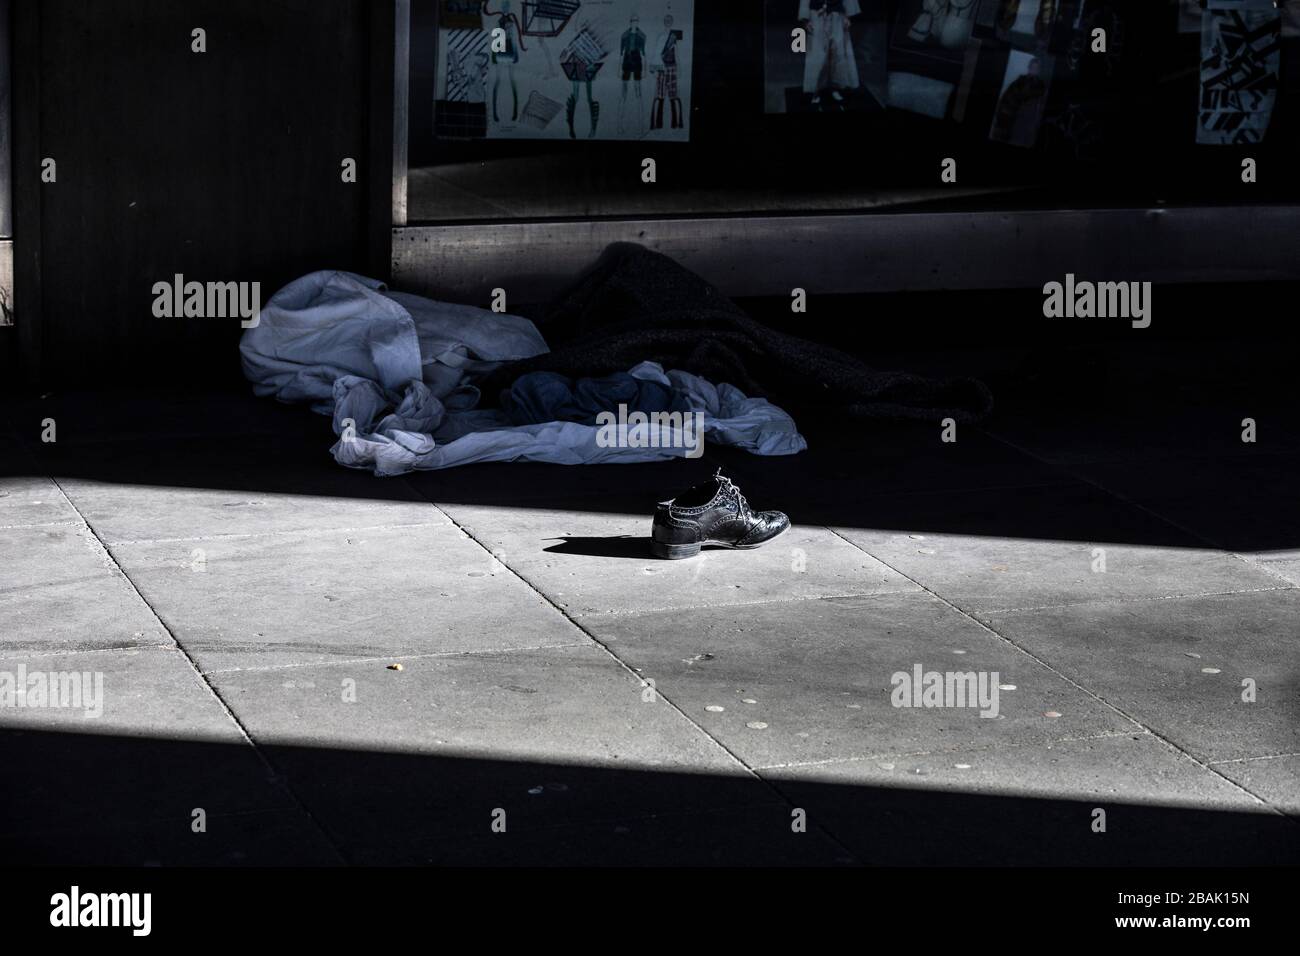 Homeless persons shoe sits abandoned in the sunlight on the street outside Waterloo Station, during the coronavirus lockdown, London, UK Stock Photo